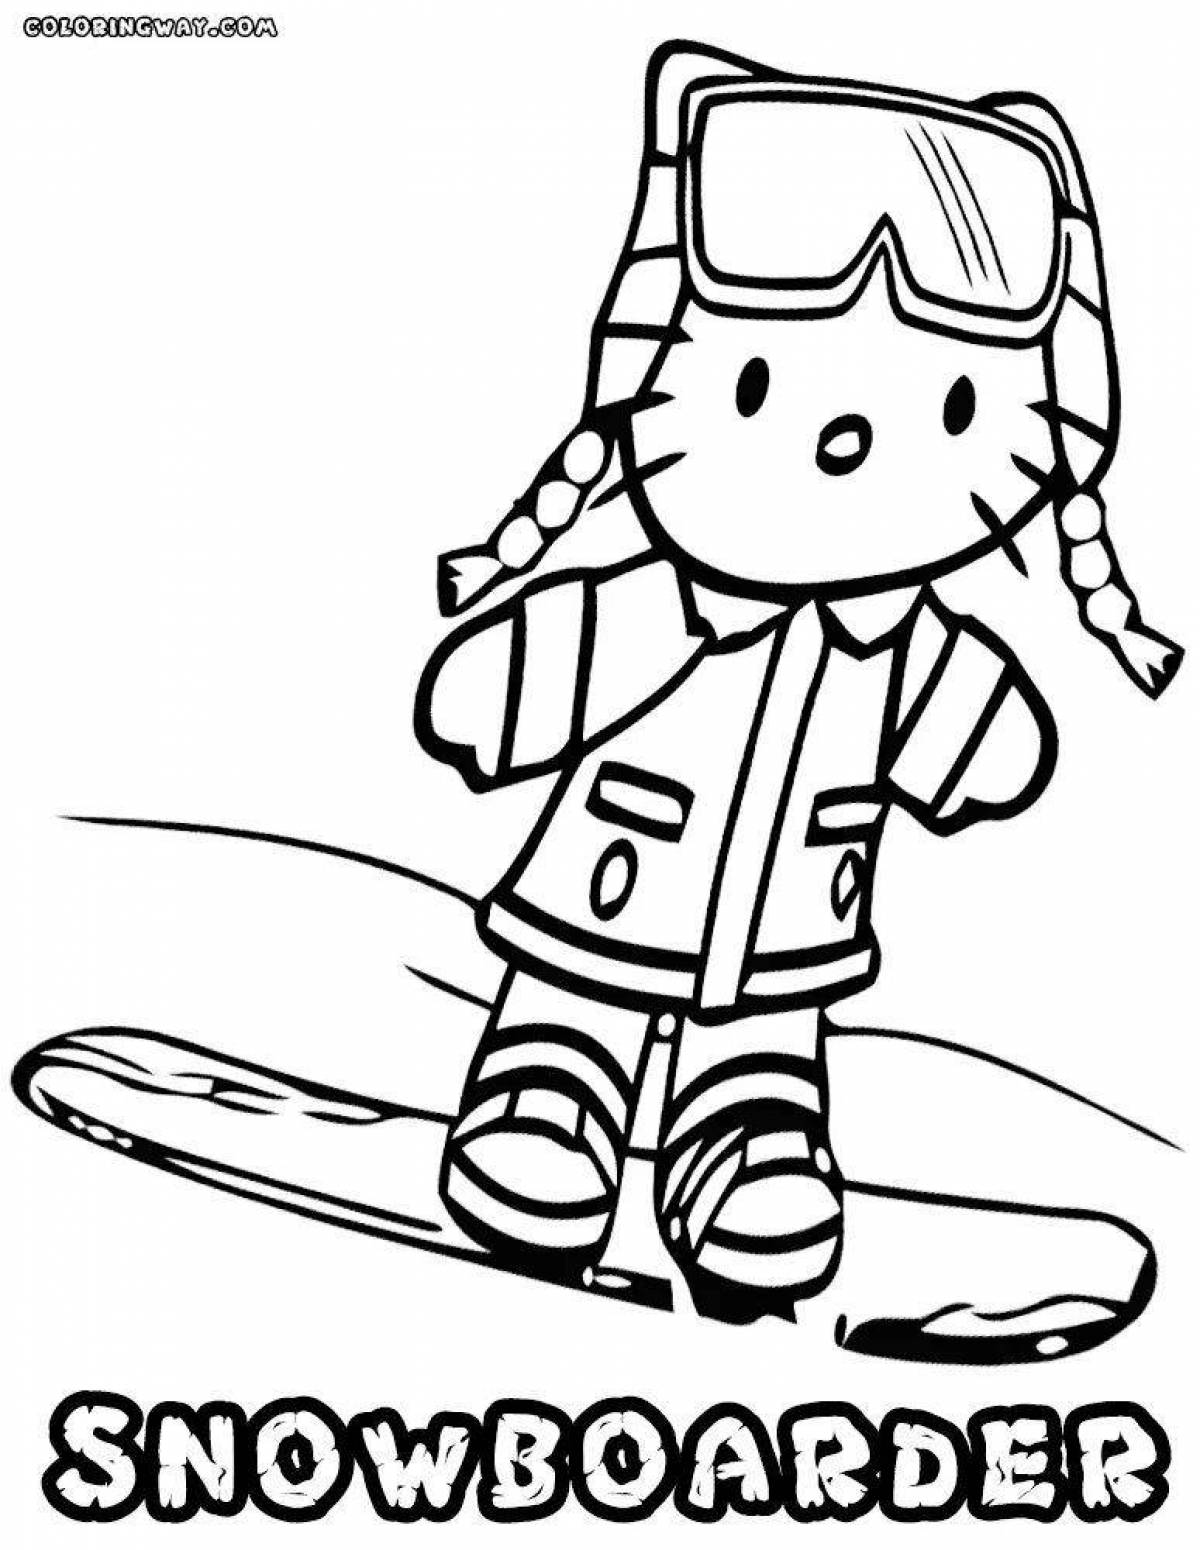 Great snowboard coloring page